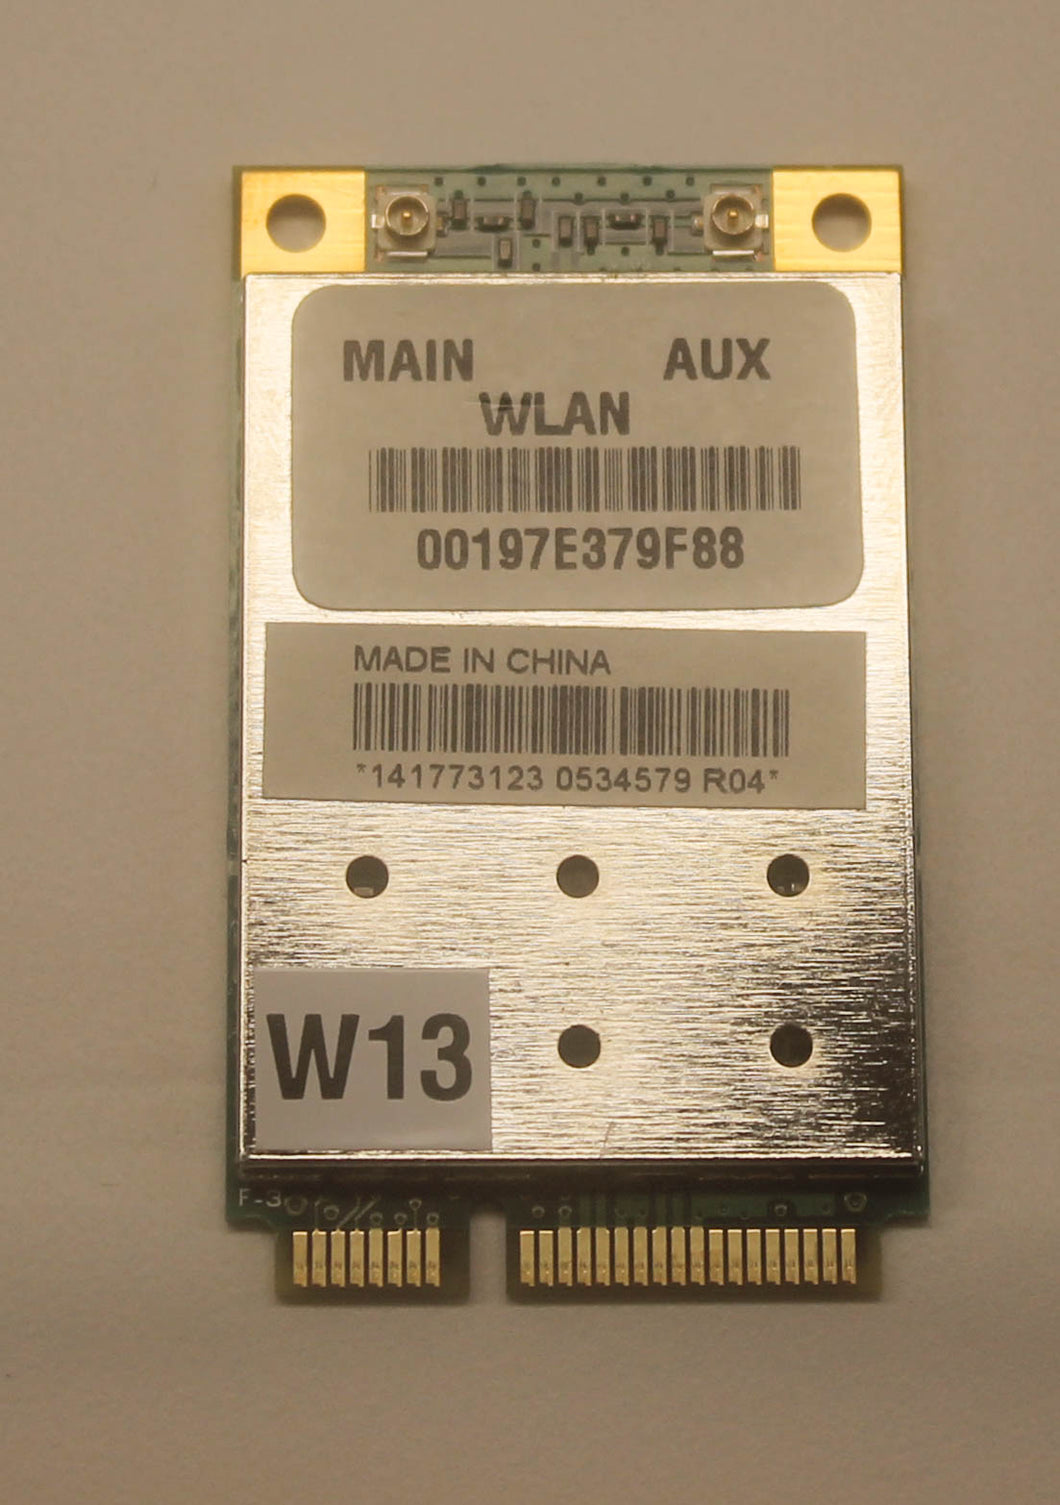 1-417-731-23 141773123 Sony Wireless Lan Card For Moonlight VGC-LS30E All-in-one